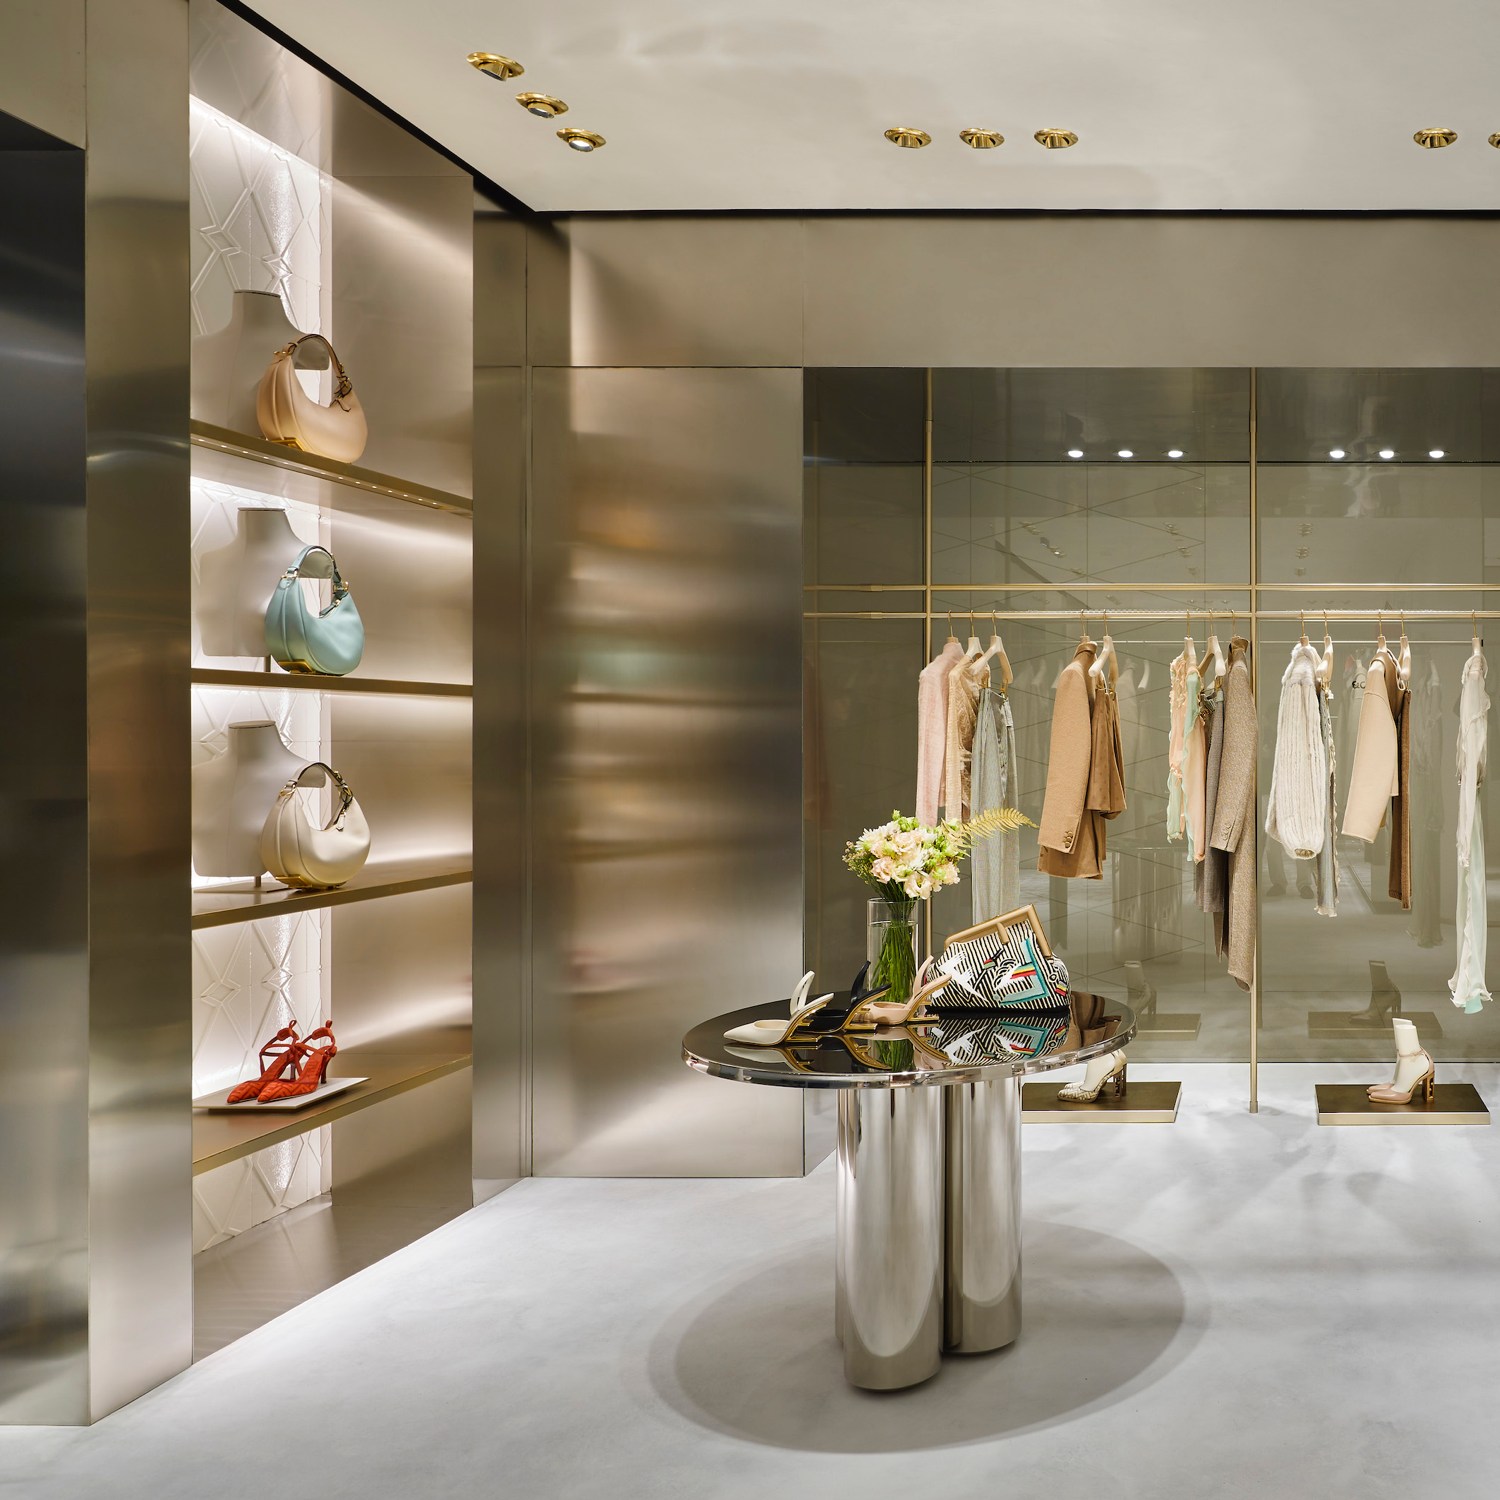 Fendi Opens Its First Boutique In Madrid